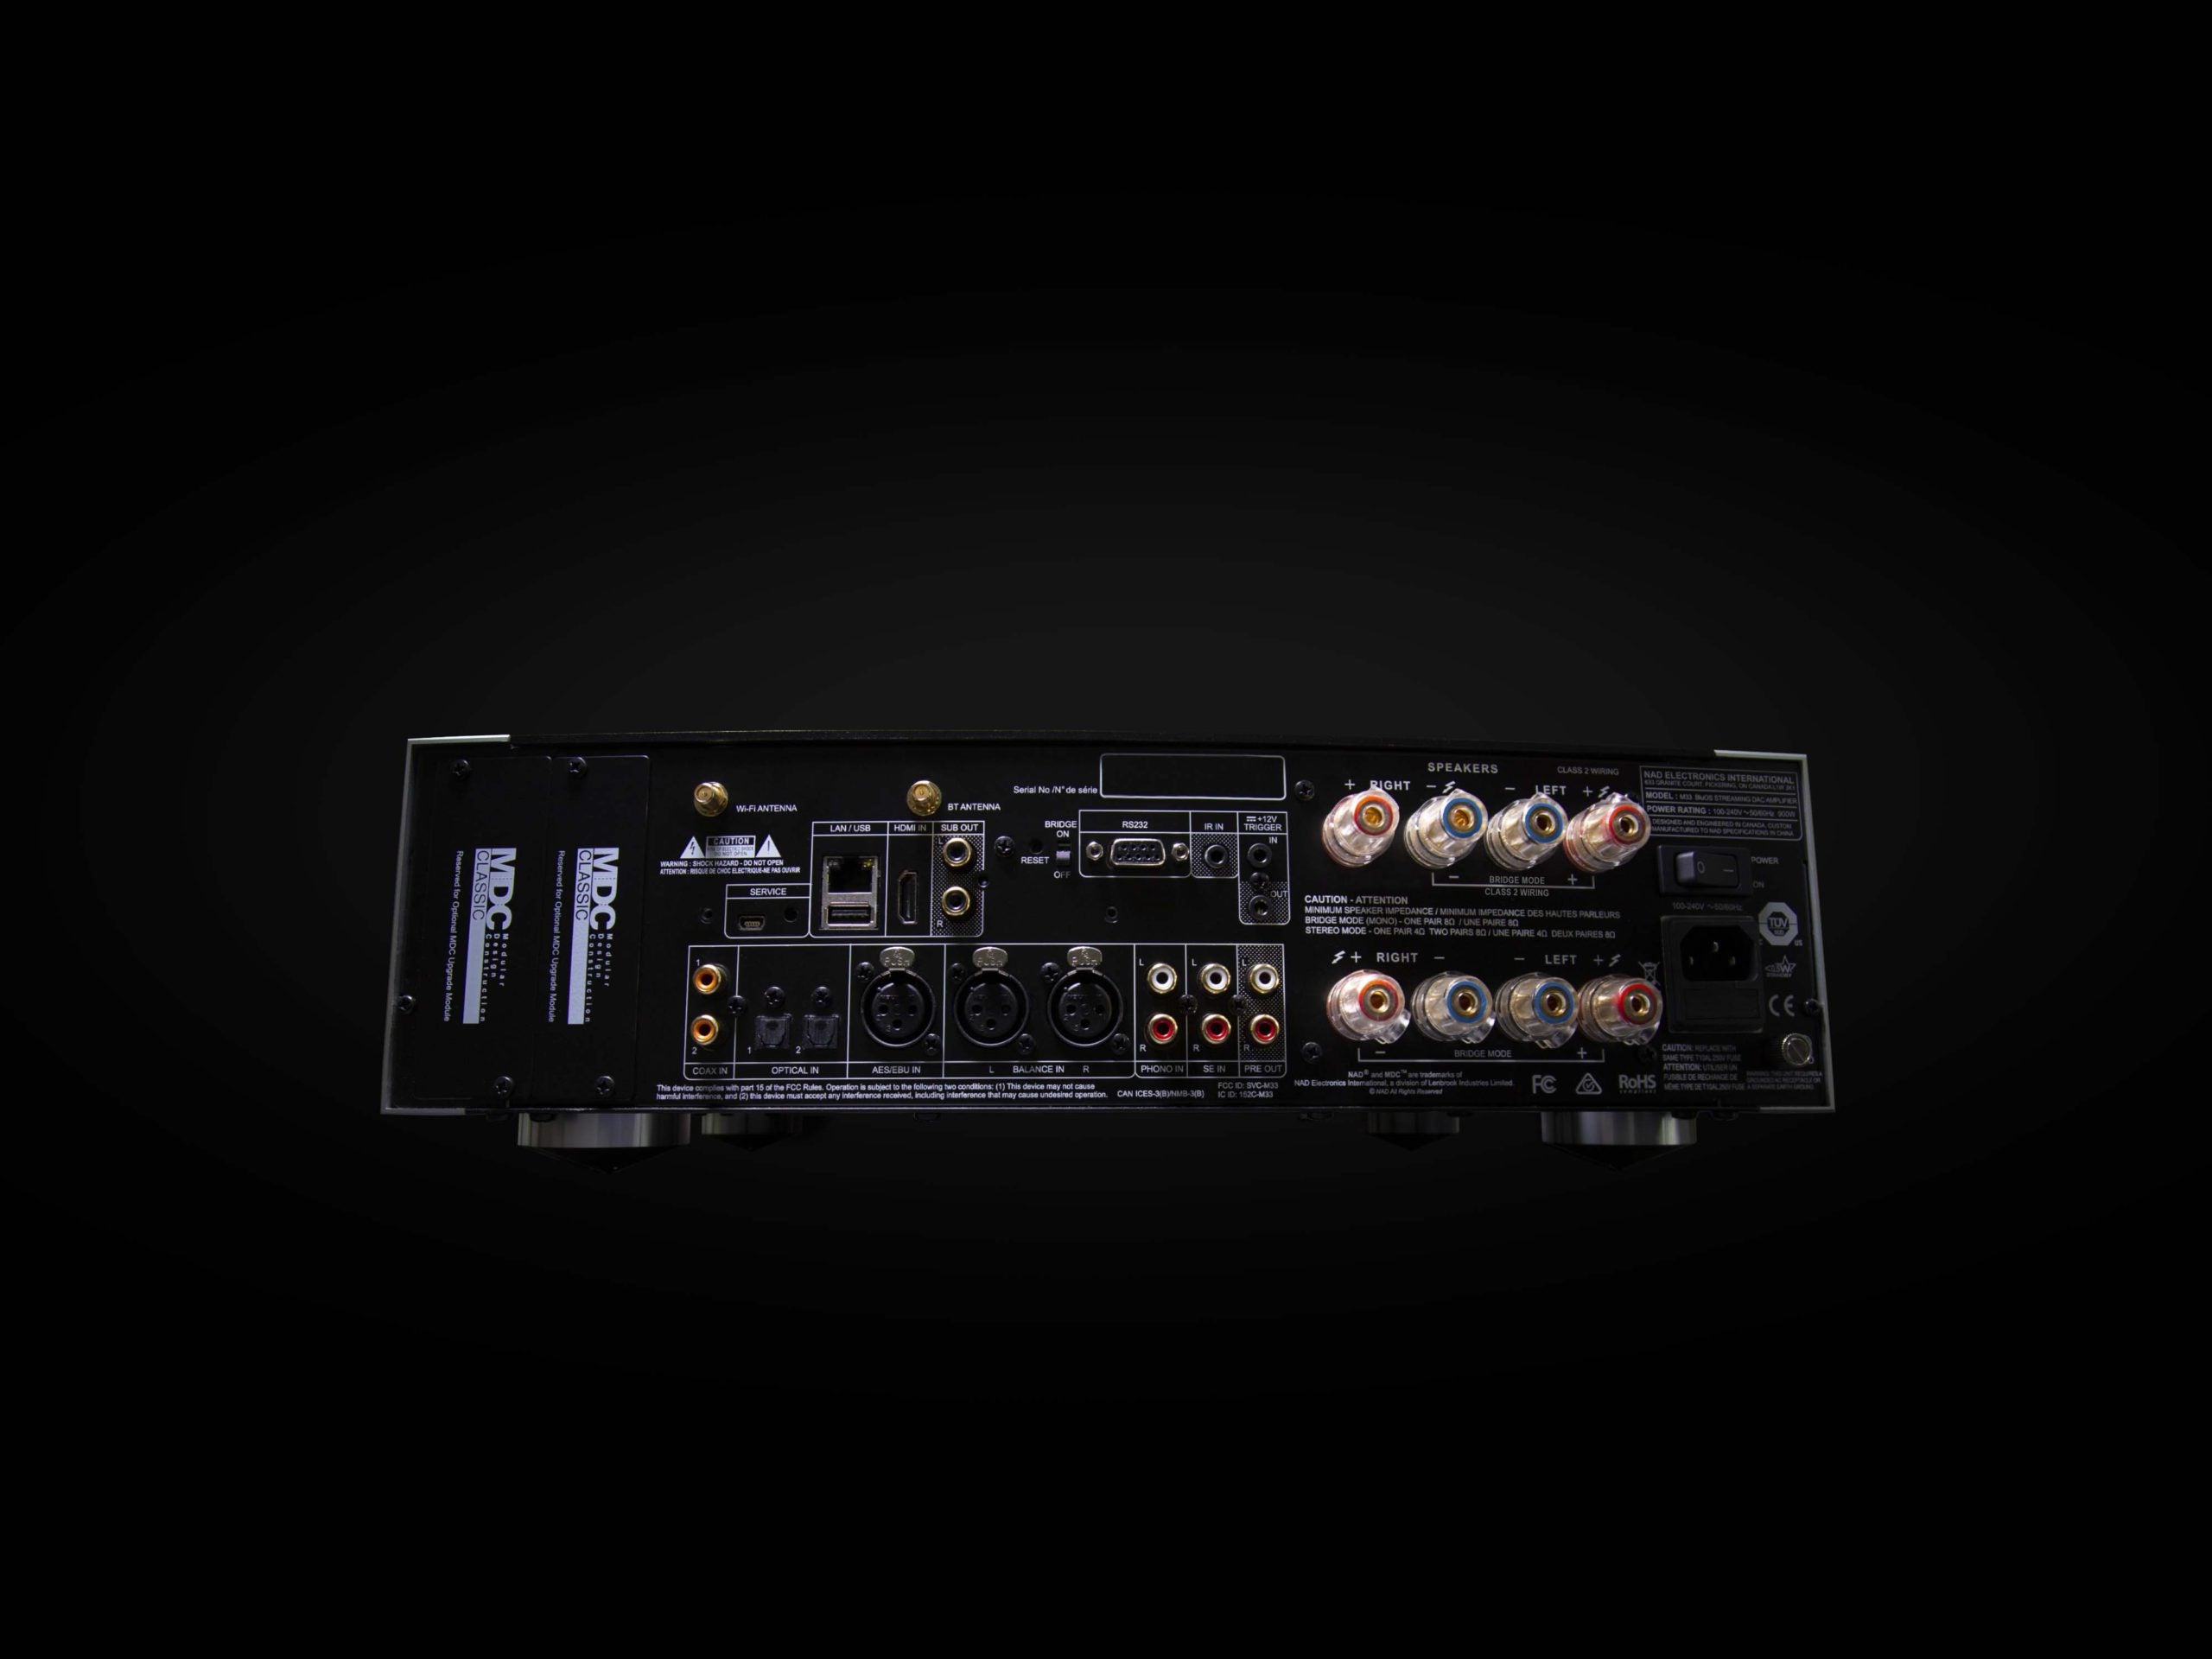 M33 Masters Series Hybrid Integrated Amplifier